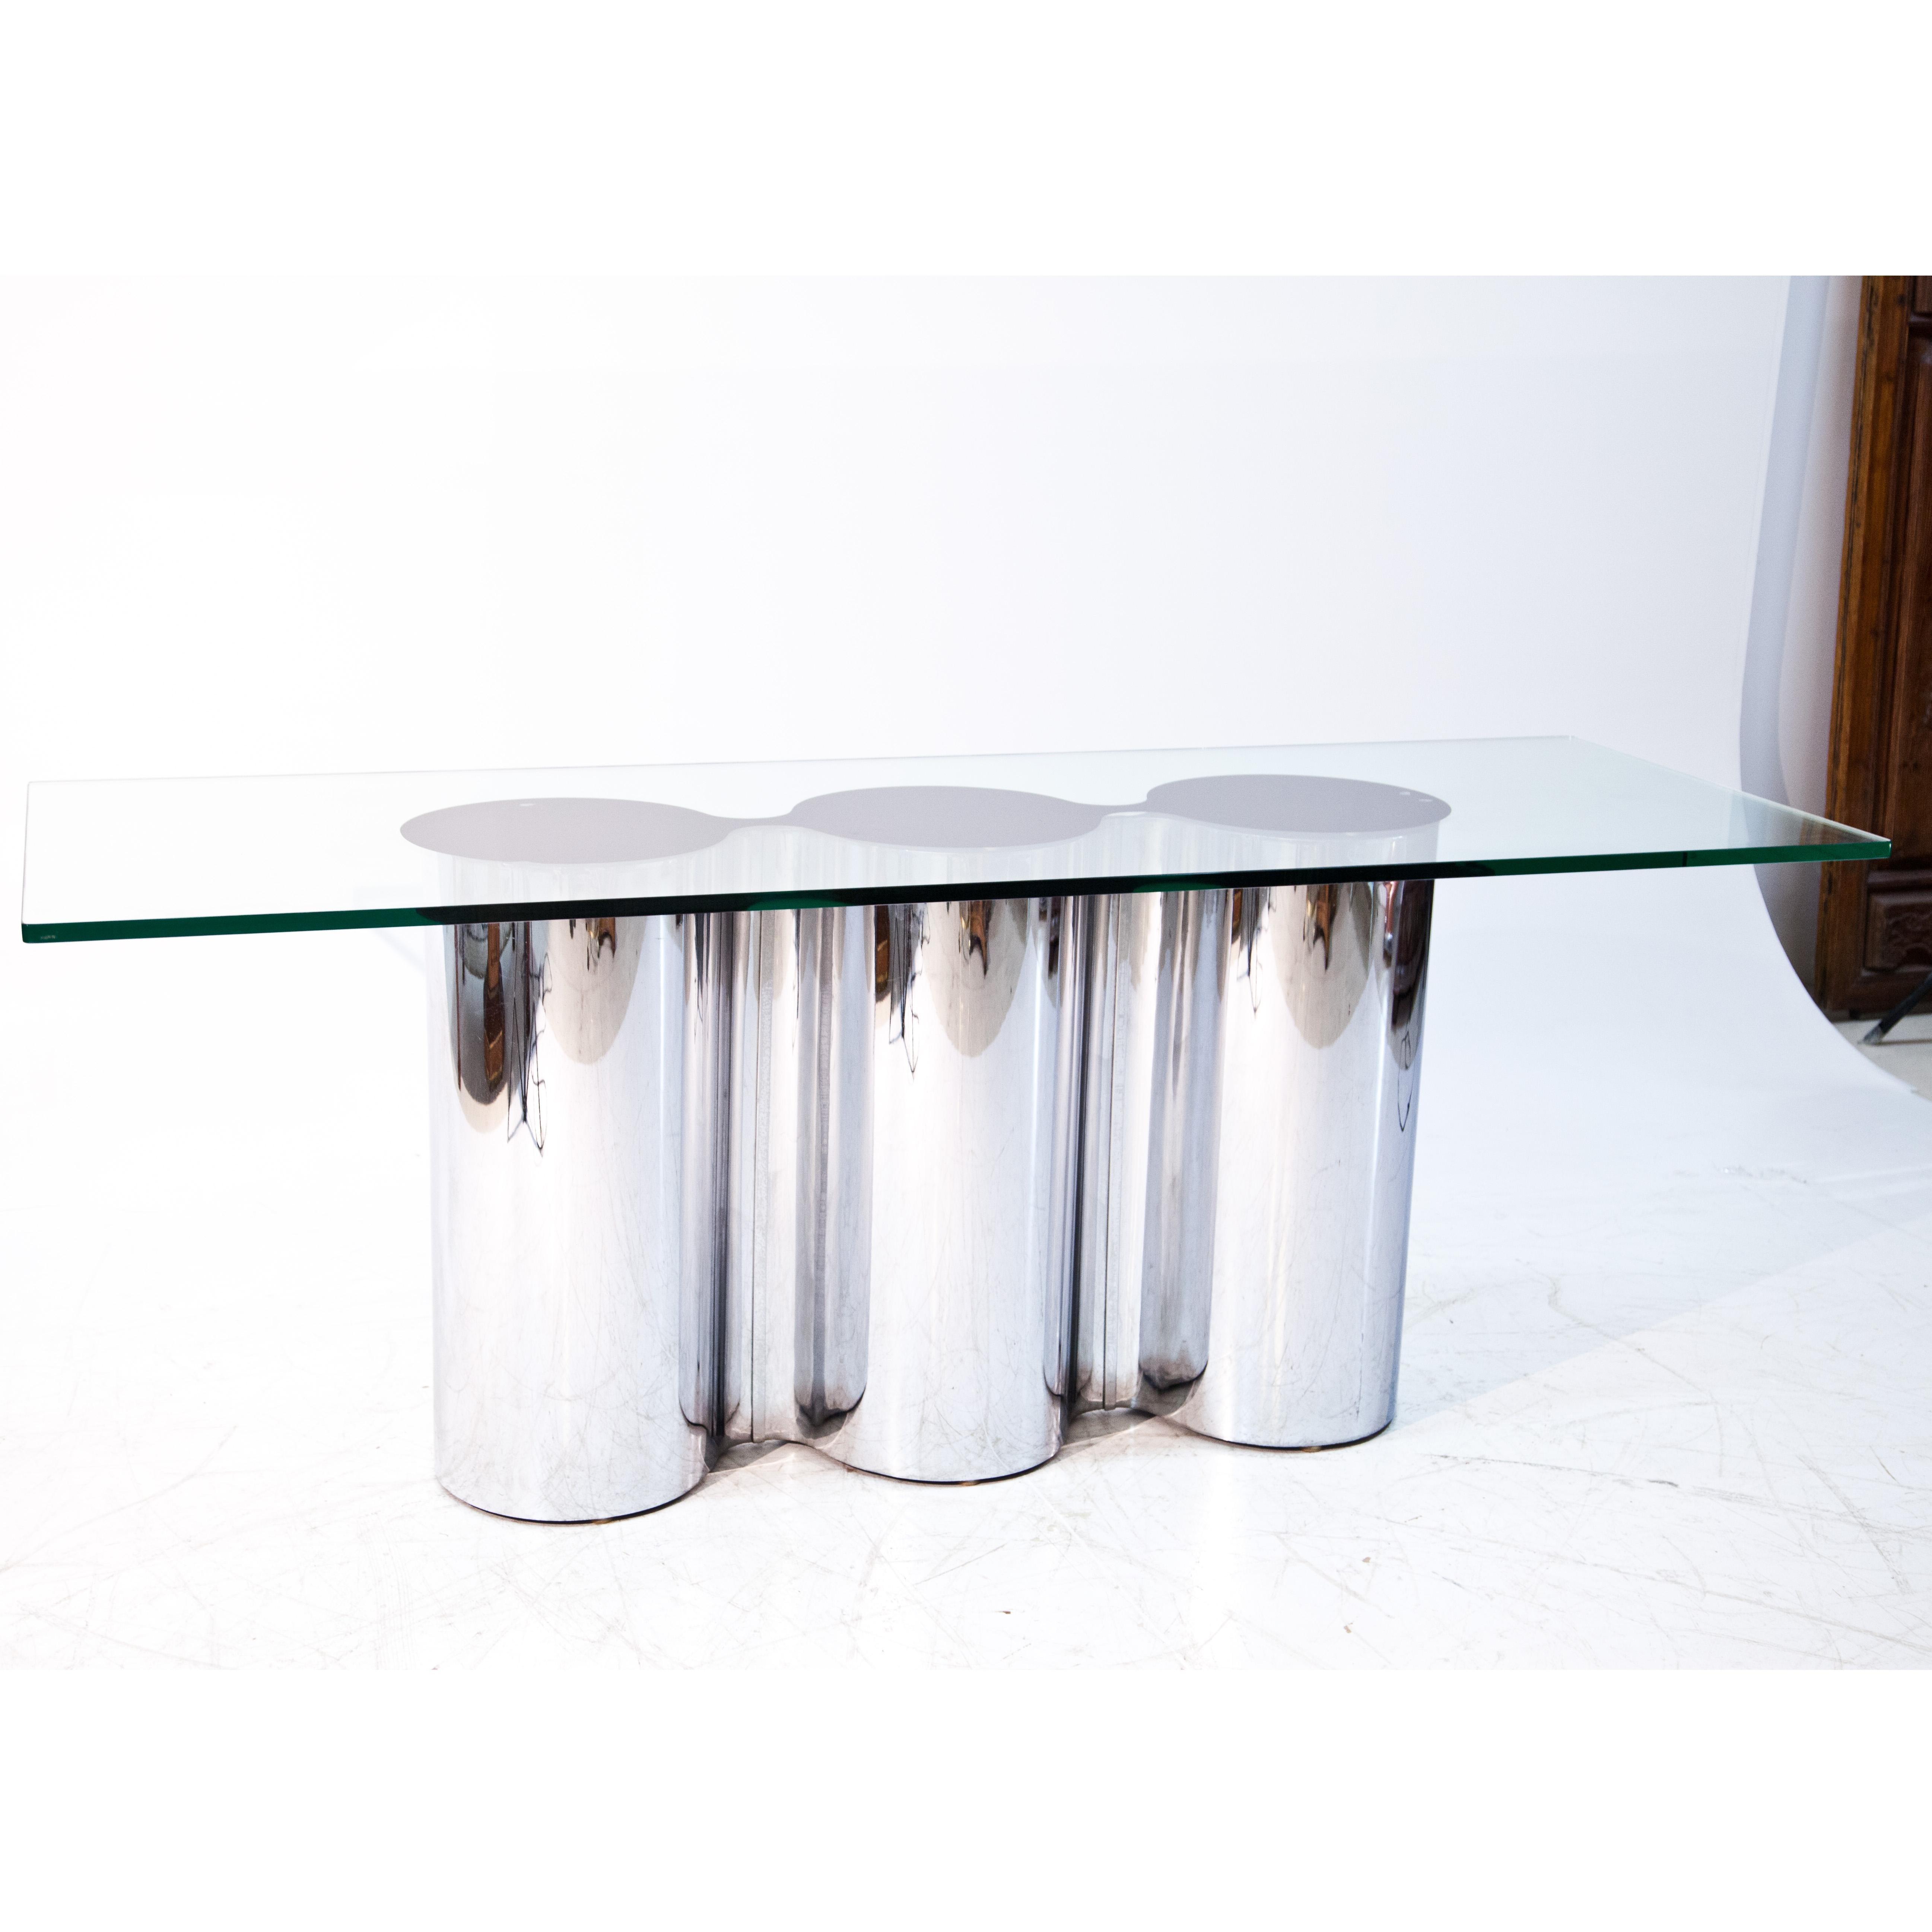 Glass and stainless steel console by Arrmet.
Thick glass plate with blackened center detail.
Supported by stainless steel base.